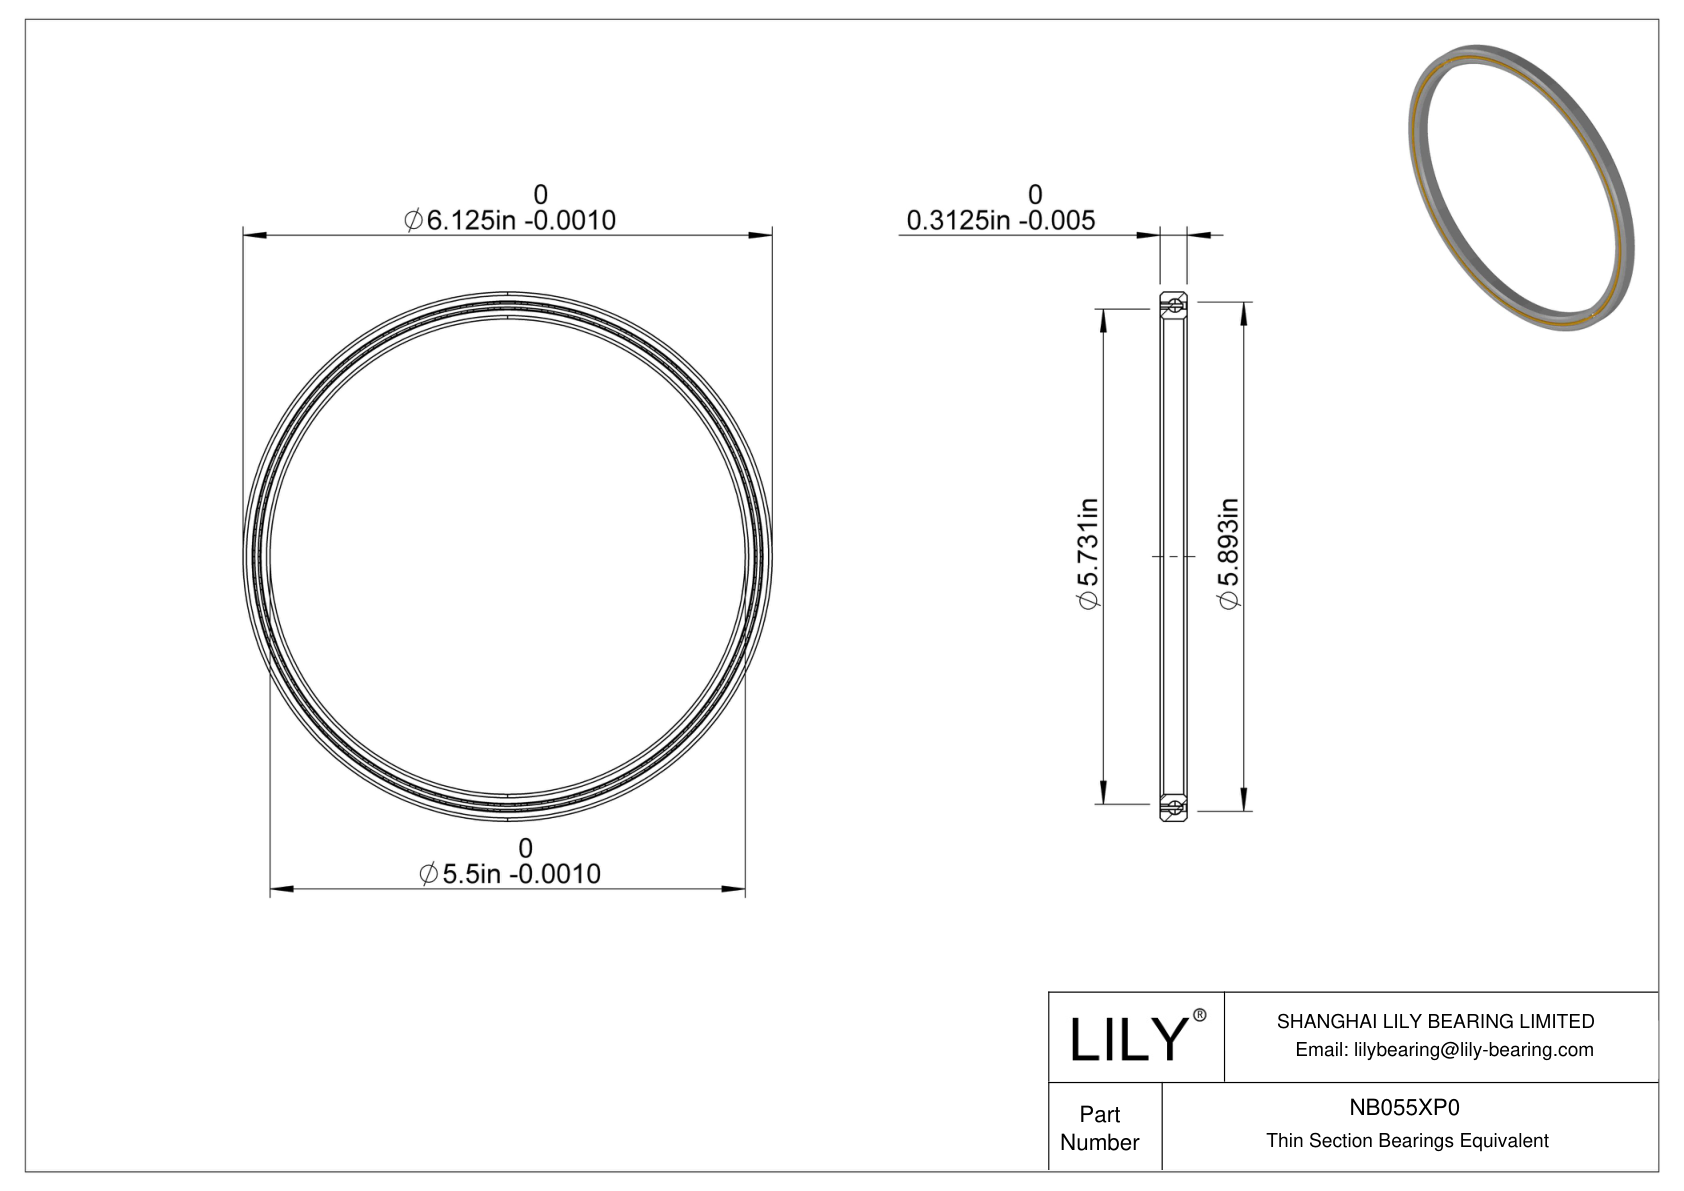 NB055XP0 Constant Section (CS) Bearings cad drawing